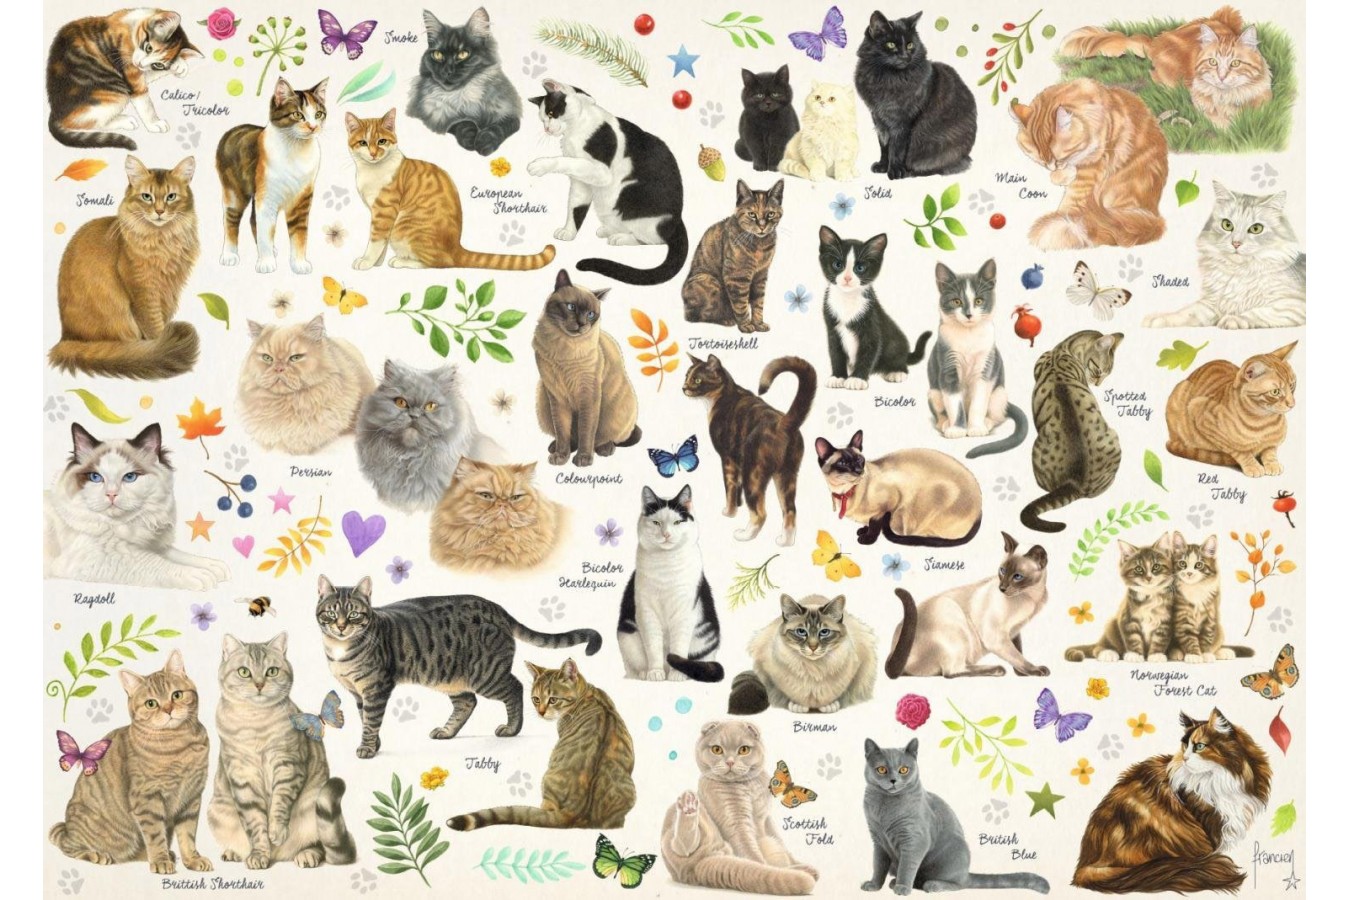 Puzzle Jumbo - Cats Poster, 1000 piese (18595)